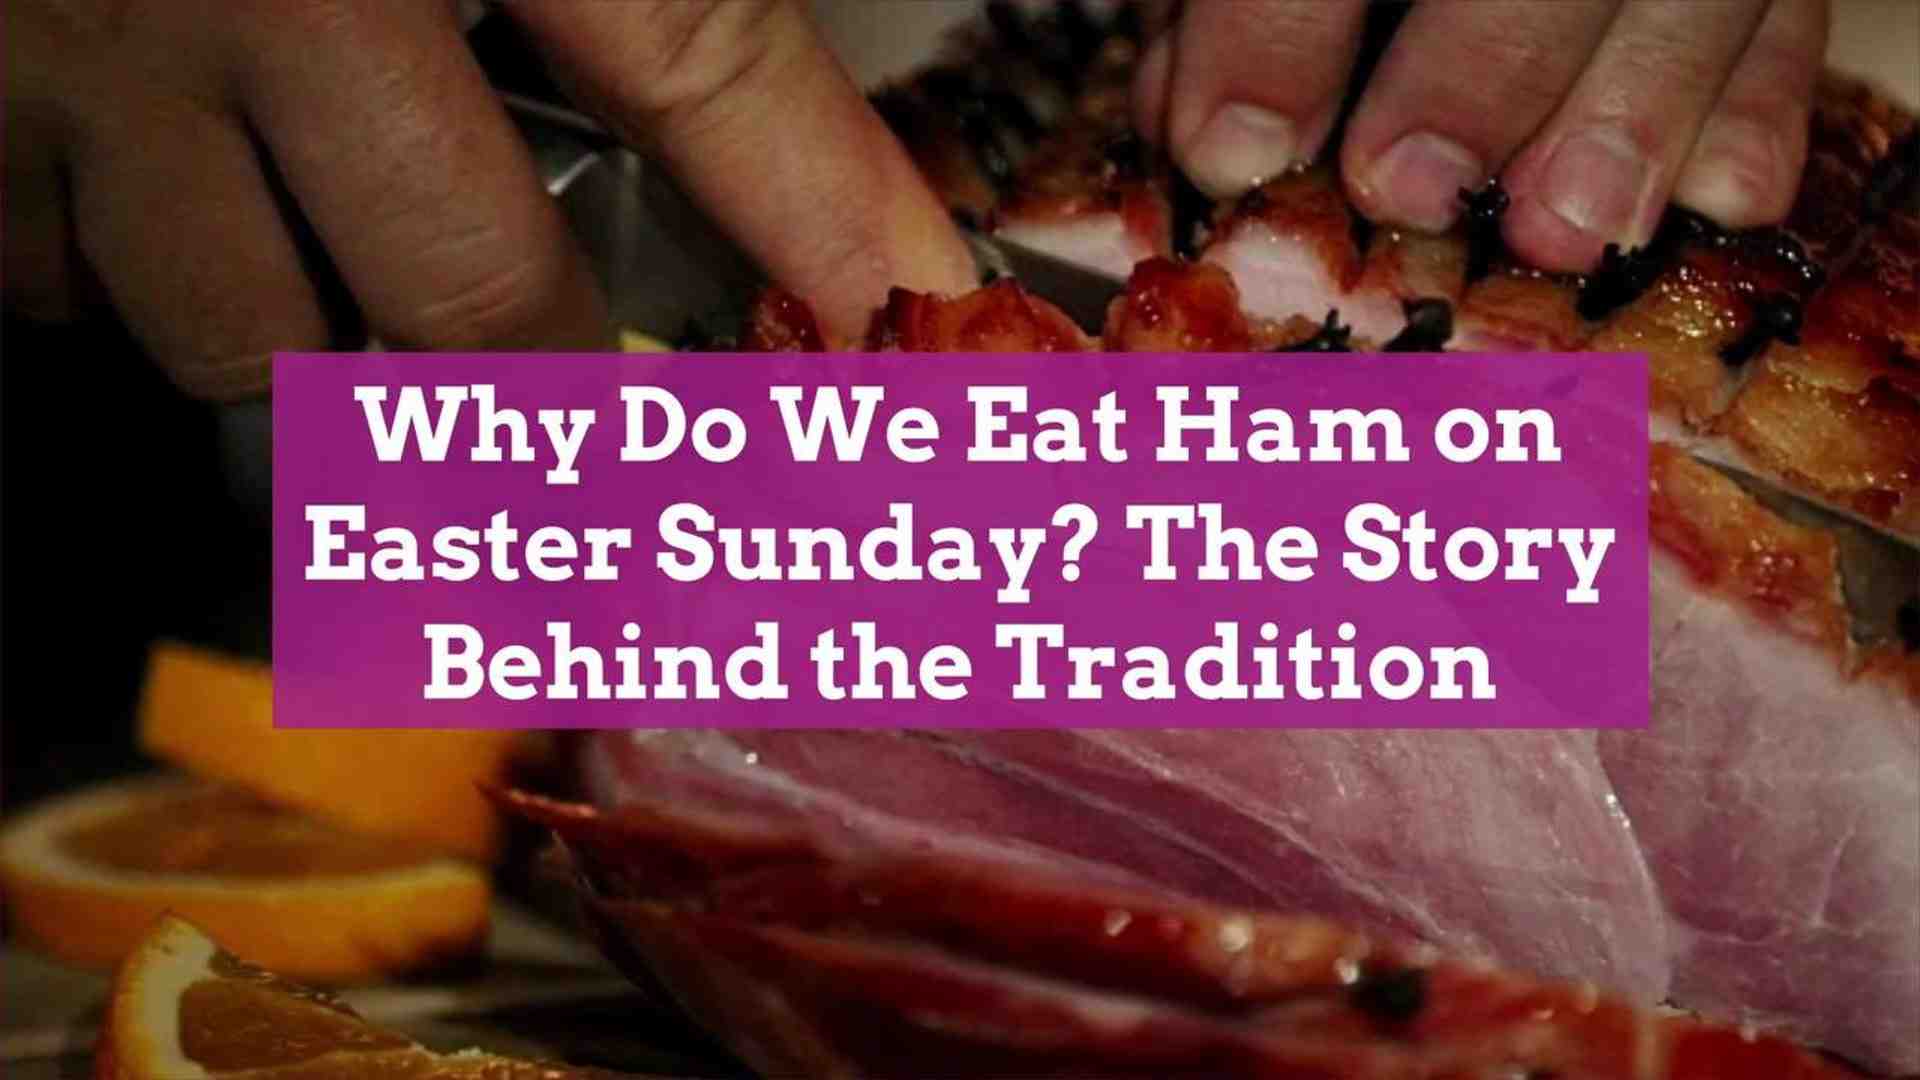 Who started the tradition of ham on Easter?